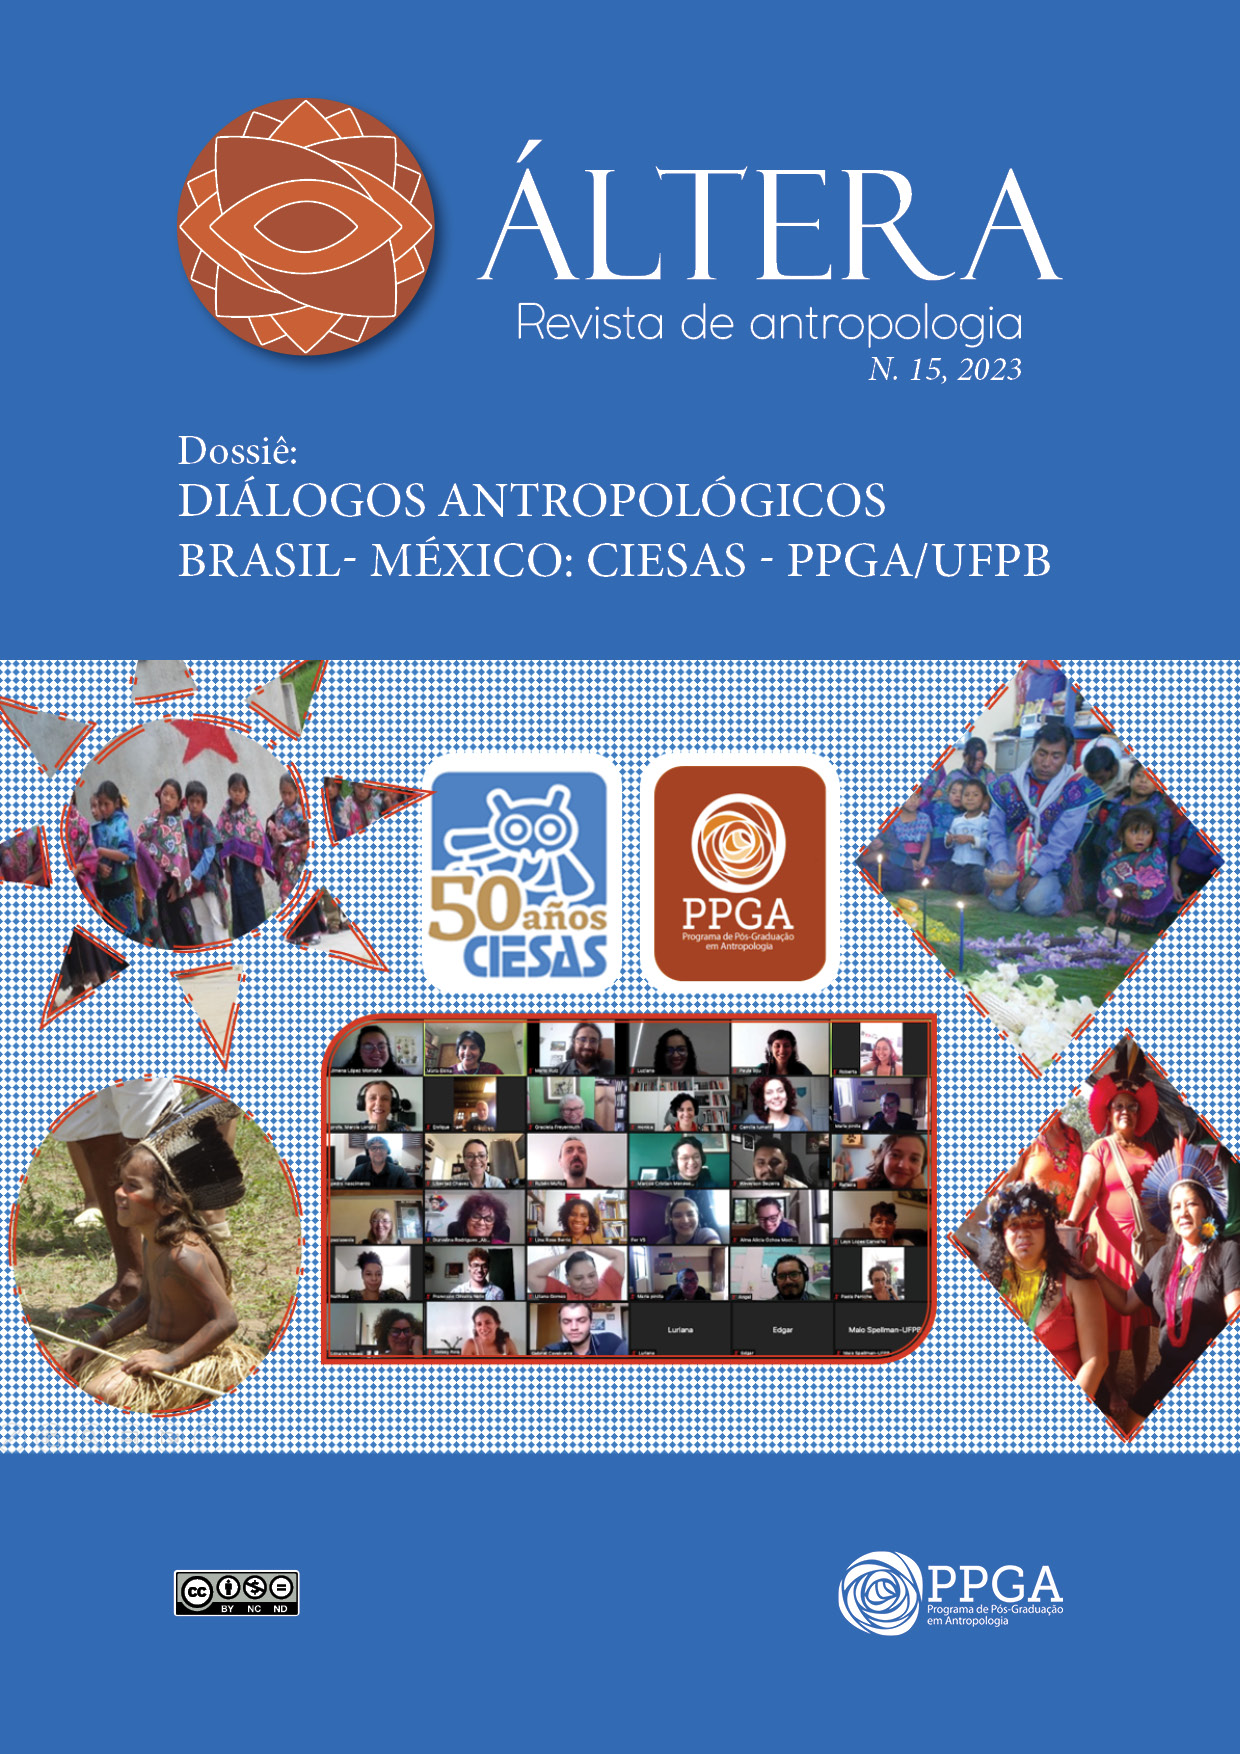 Cover of the dossier "Anthropological Dialogues Brazil-Mexico: CIESAS - PPGA/UFPB".